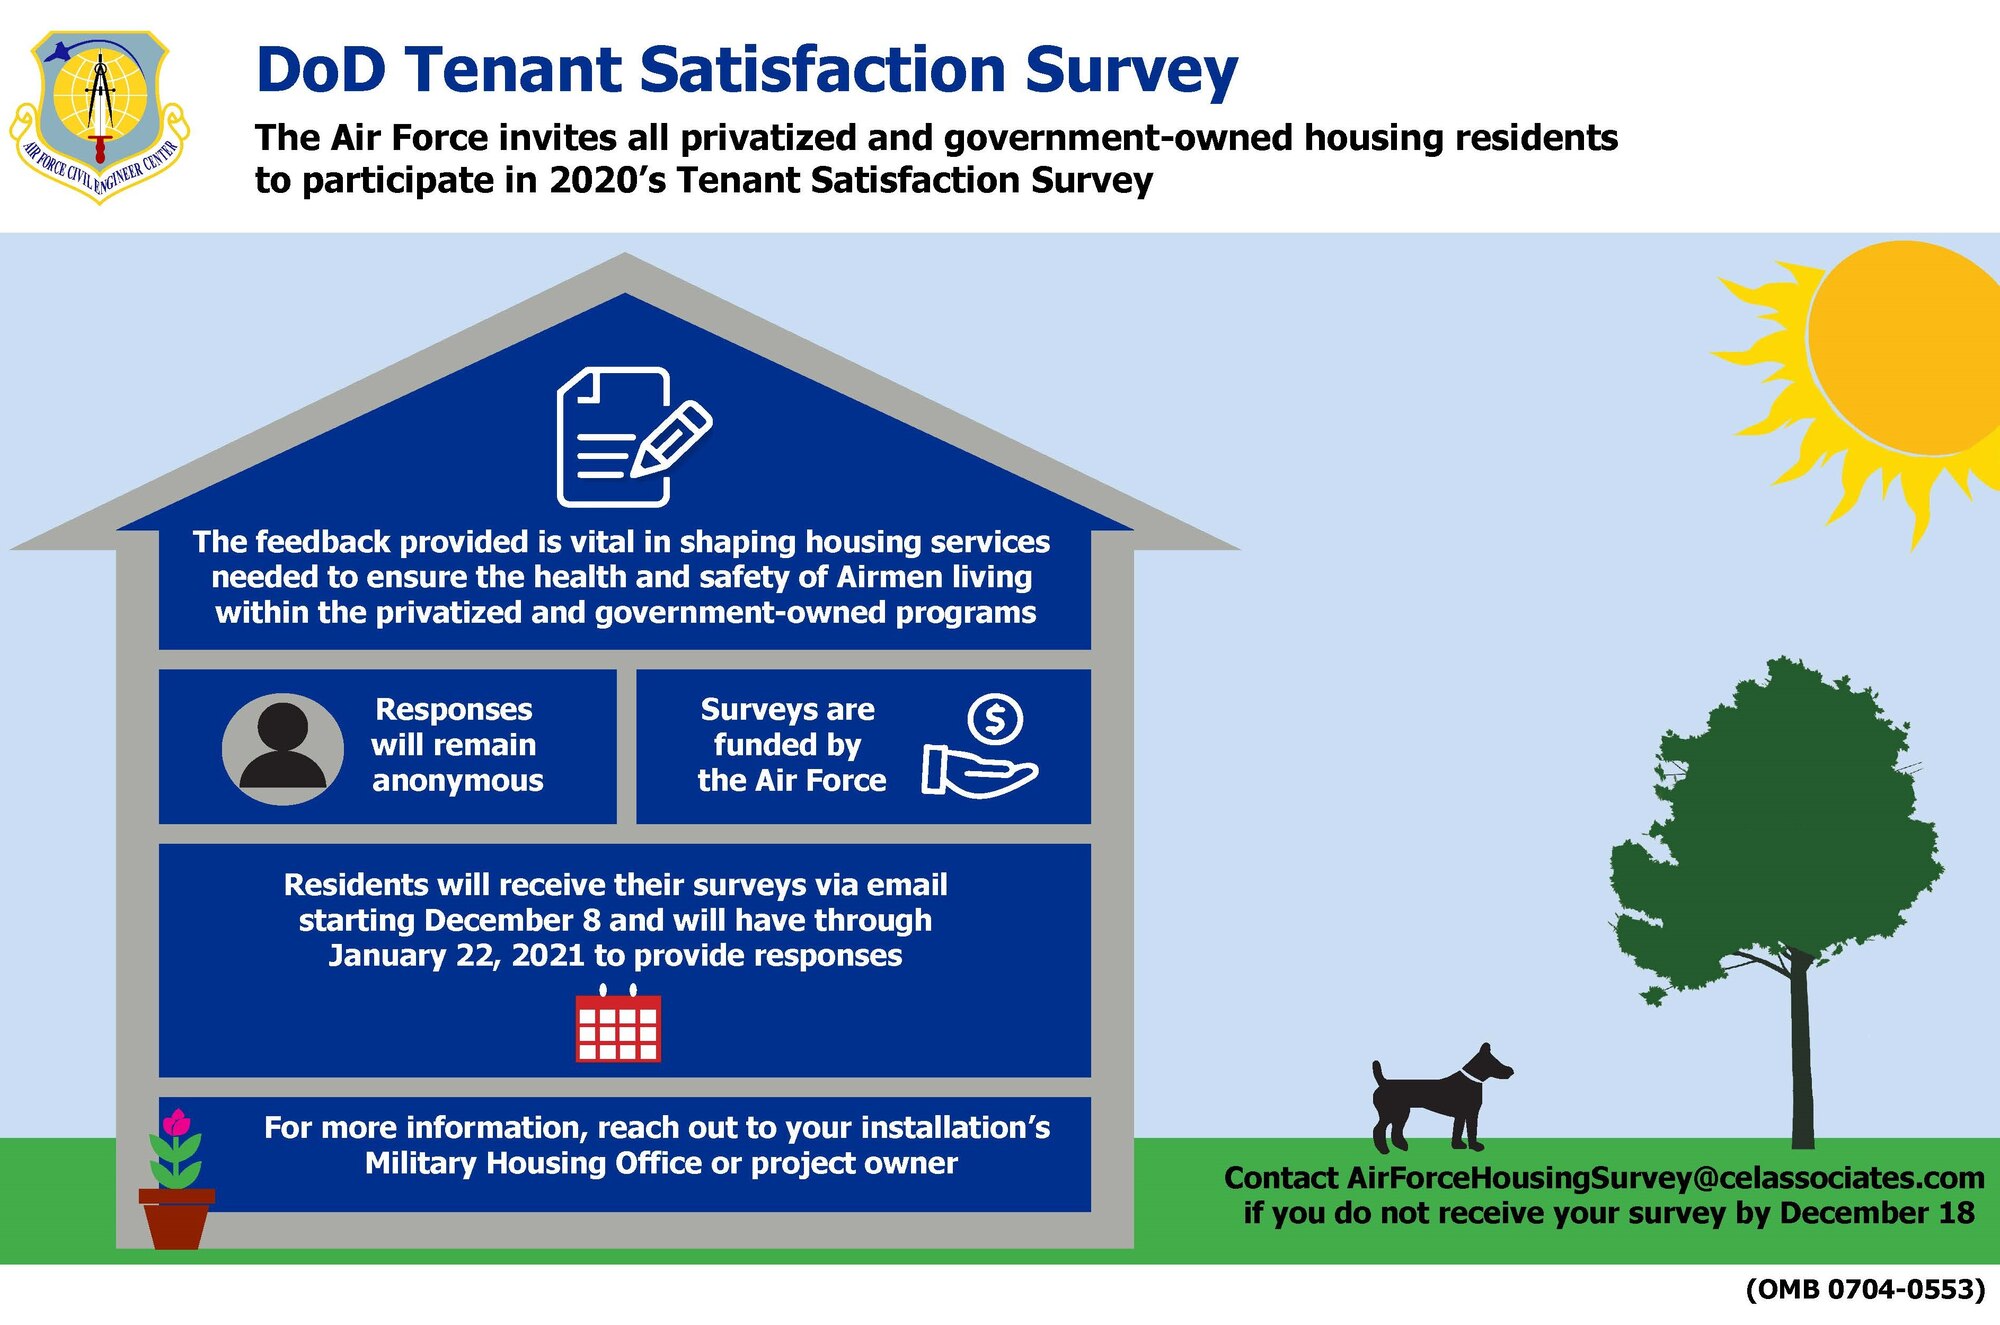 The Air Force invites all privatized and government-owned housing residents to participate in the 2020 Tenant Satisfaction Survey.